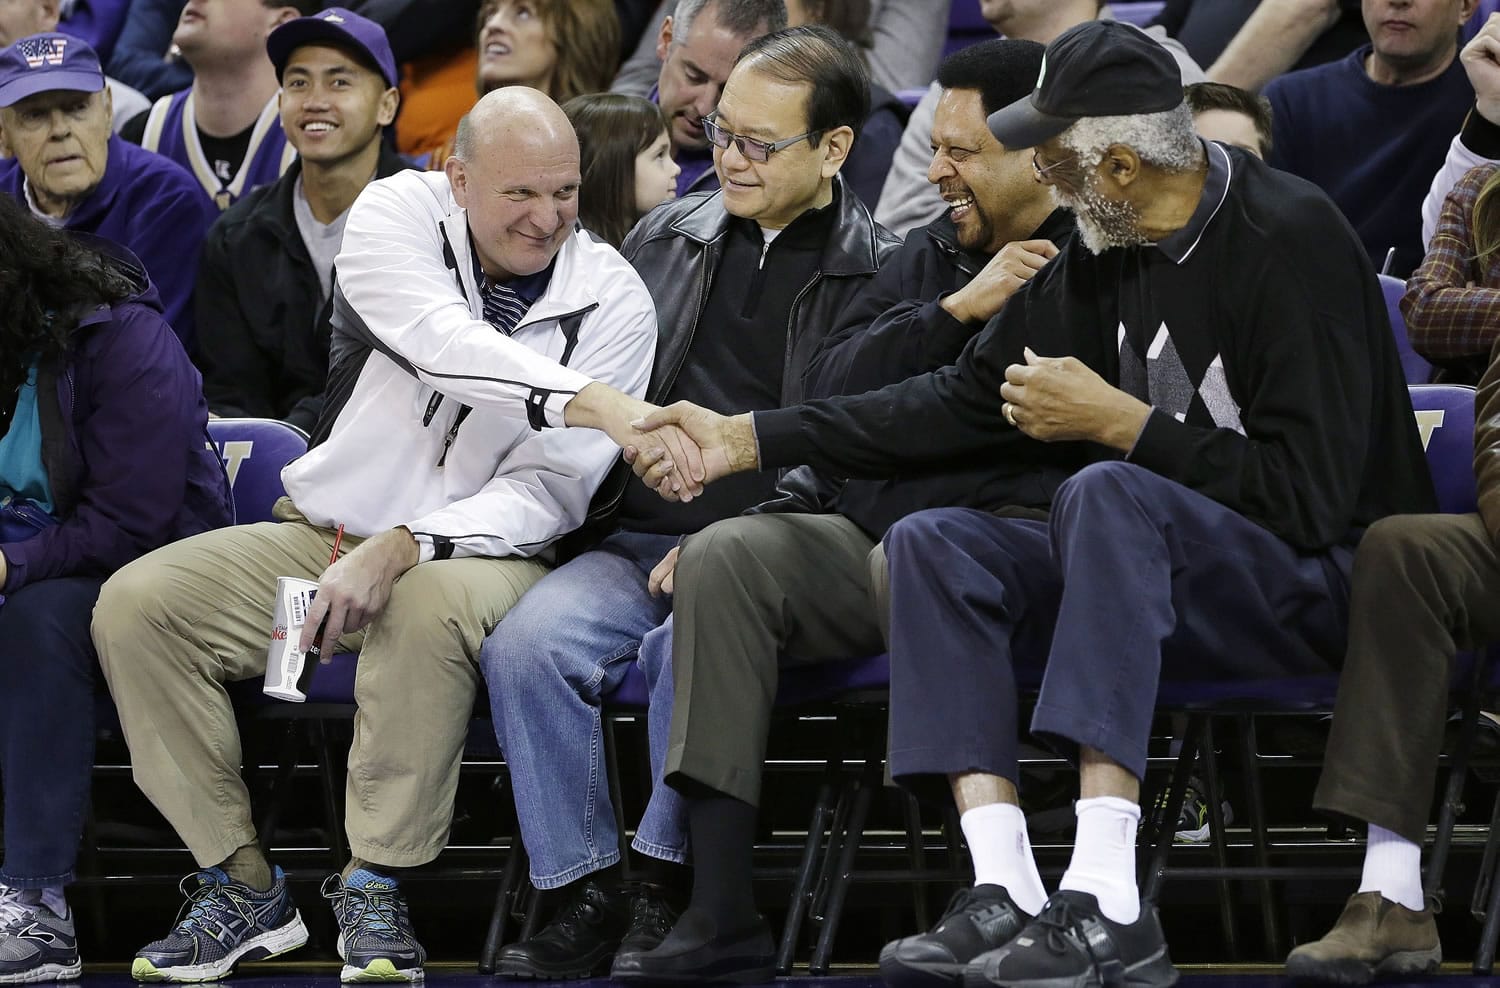 Then-Microsoft CEO Steve Ballmer, left, shakes hands with former NBA players Bill Russell, right, and &quot;Downtown&quot; Freddie Brown as Omar Lee looks on during an NCAA college basketball game between Washington and Oregon State in Seattle in January.